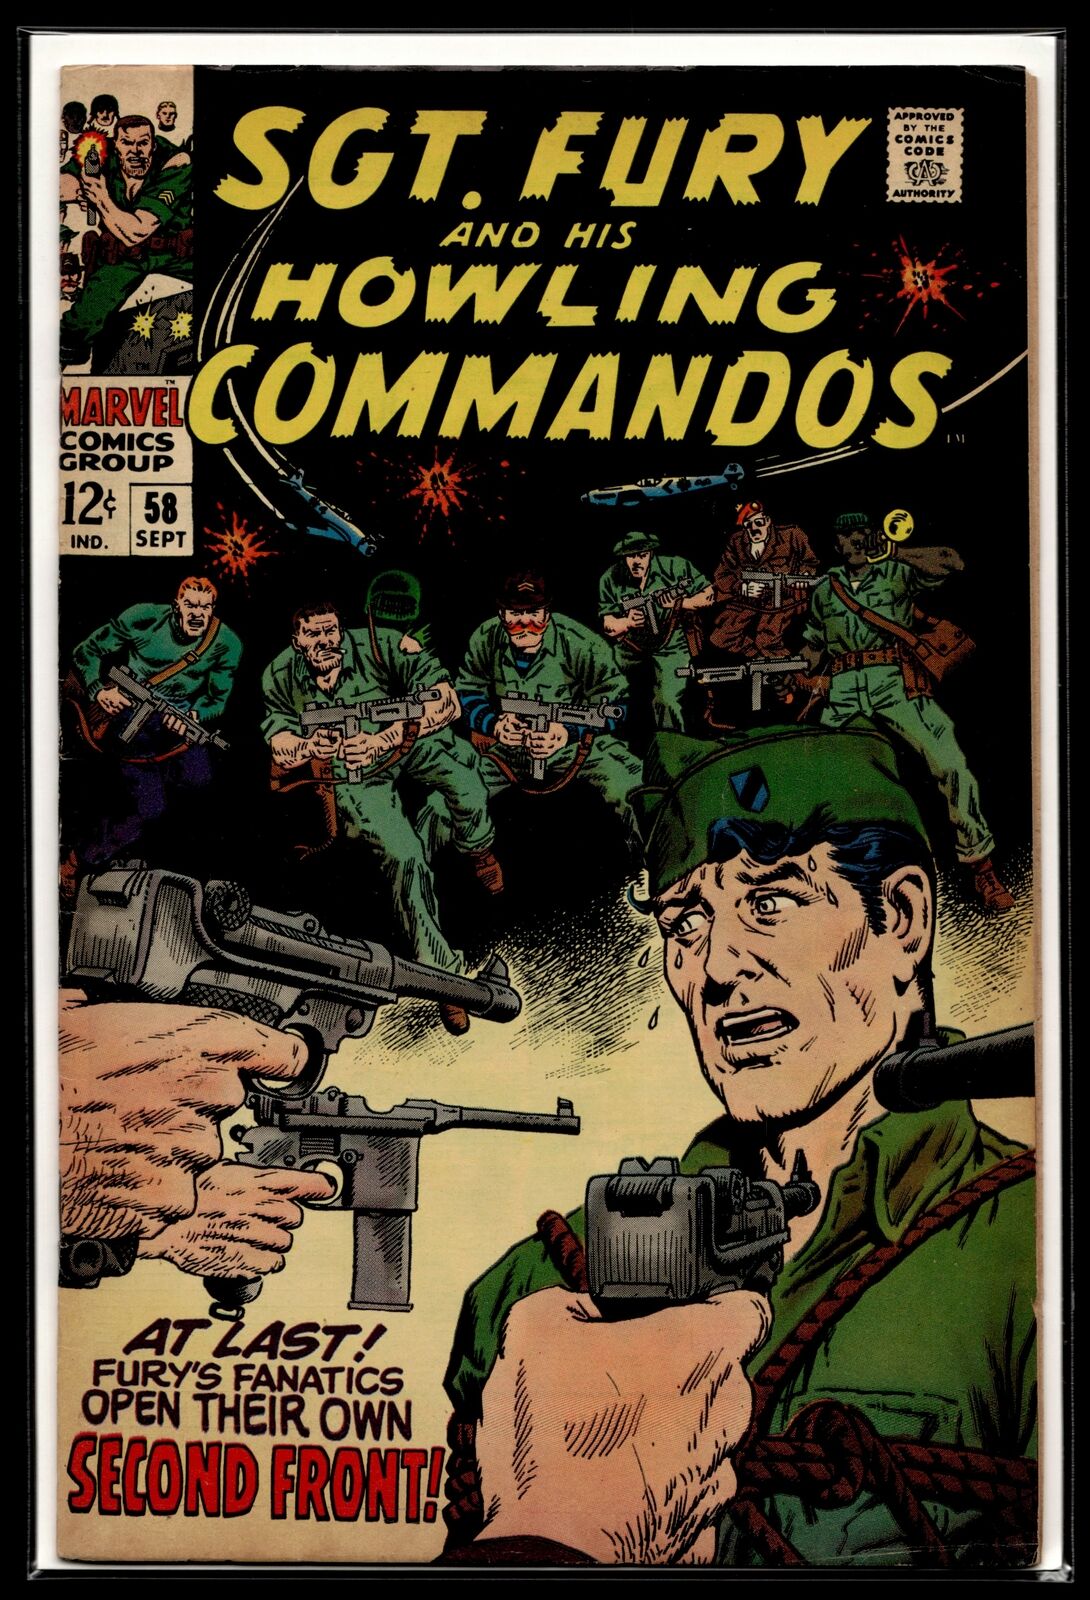 1968 Sgt. Fury and His Howling Commandos #58 Marvel Comic